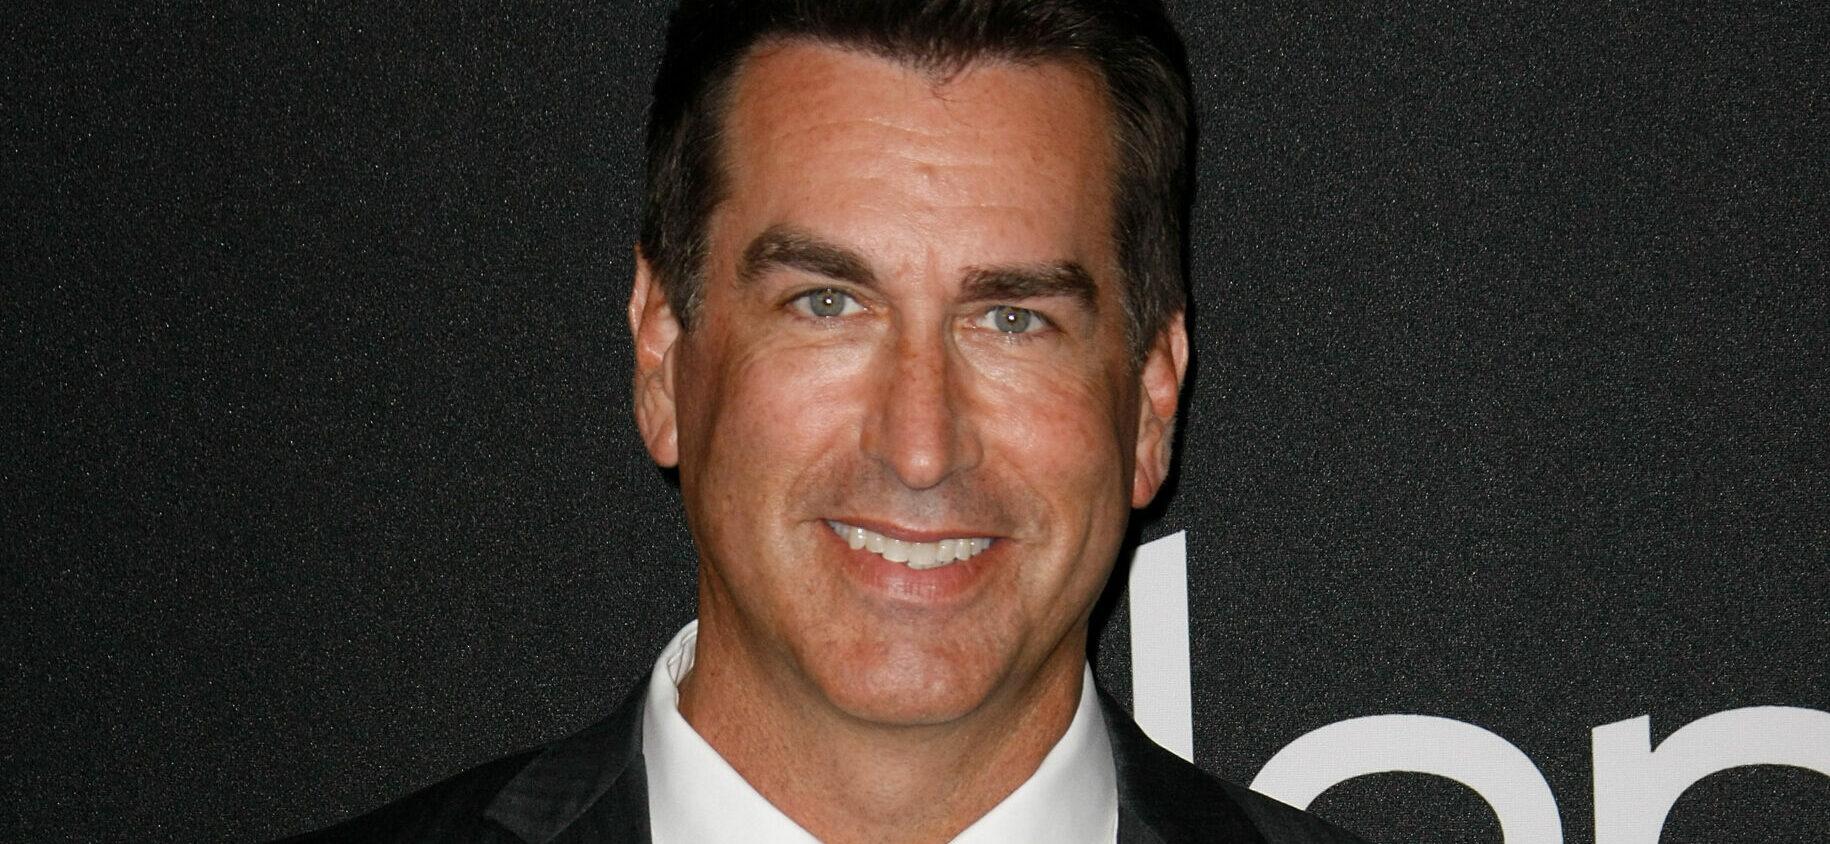 Rob Riggle at the 23rd Annual Hollywood Film Awards - Arrivals